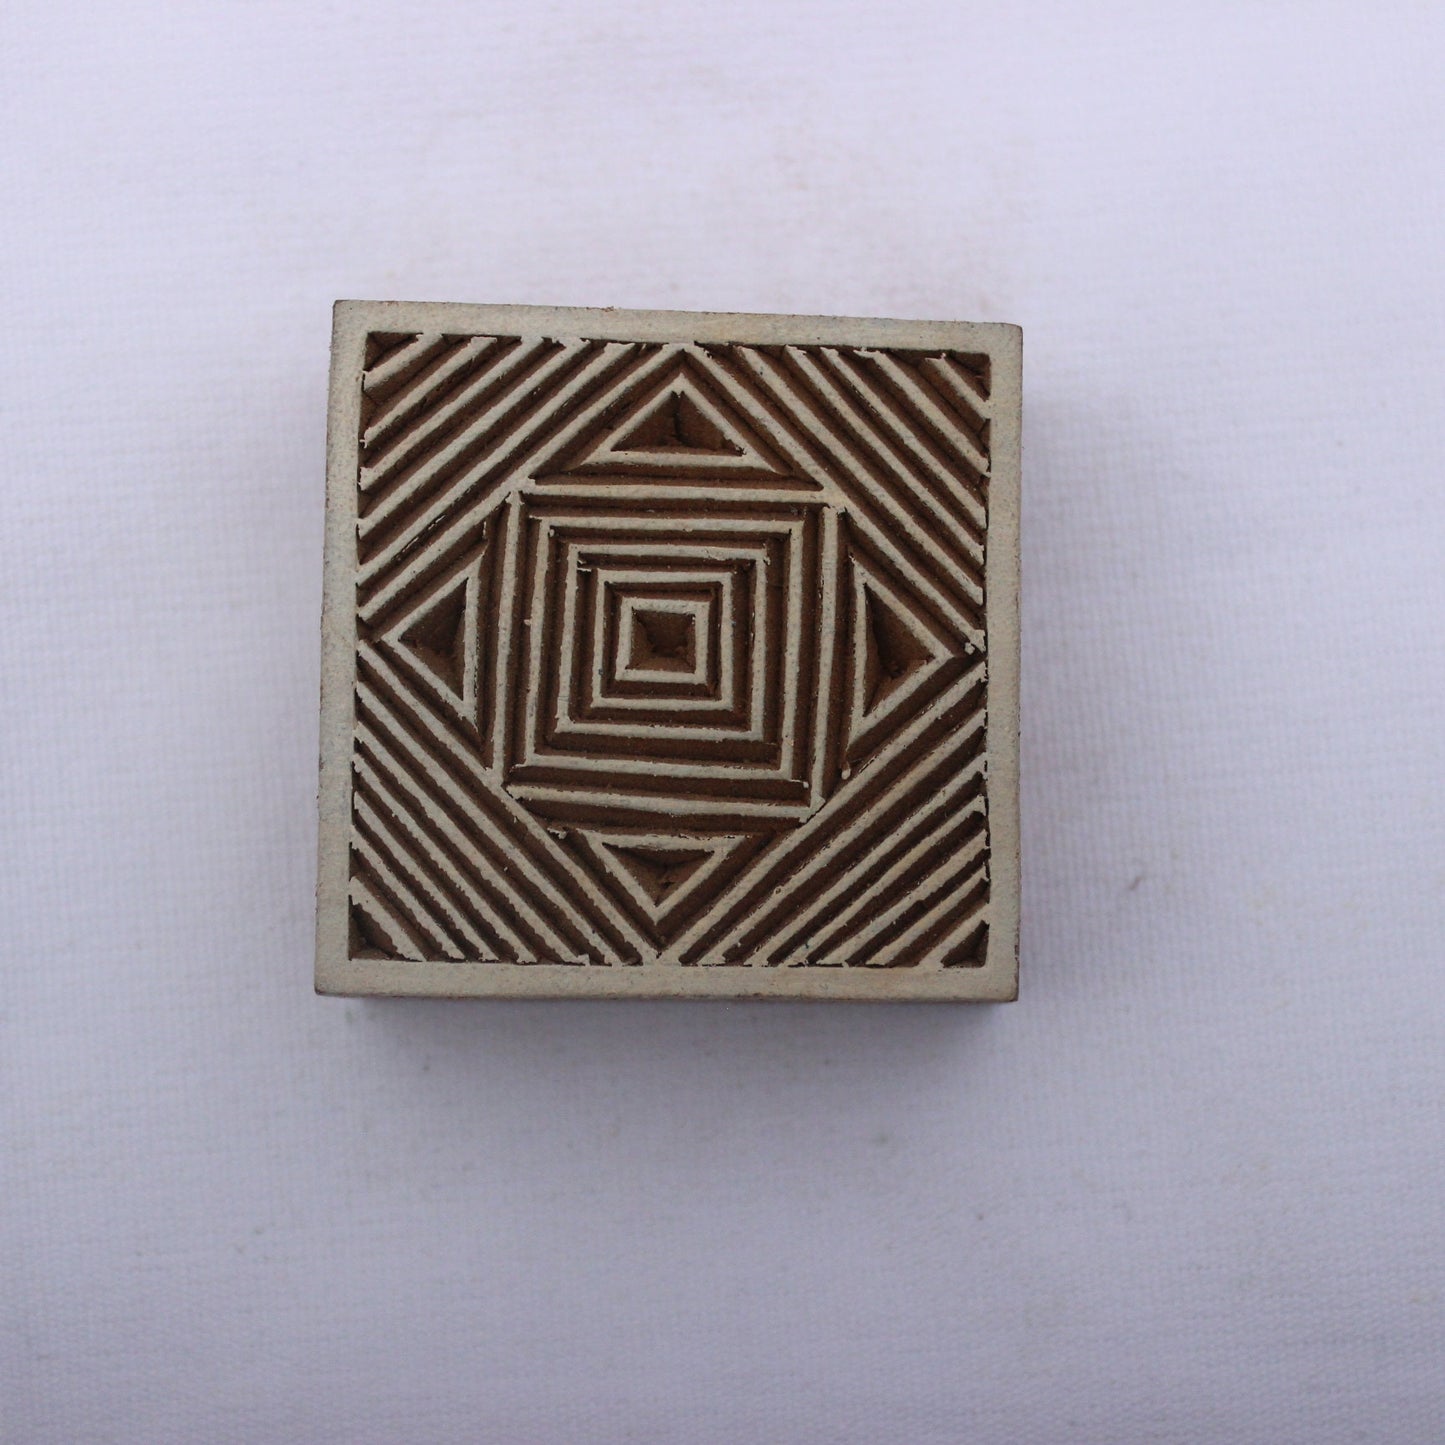 Carve Wooden Stamp Carve Block Wood Block Stamp For Printing Celtic Stamp Square Fabric Stamp Geometric Soap Stamp Traditional Wooden Block